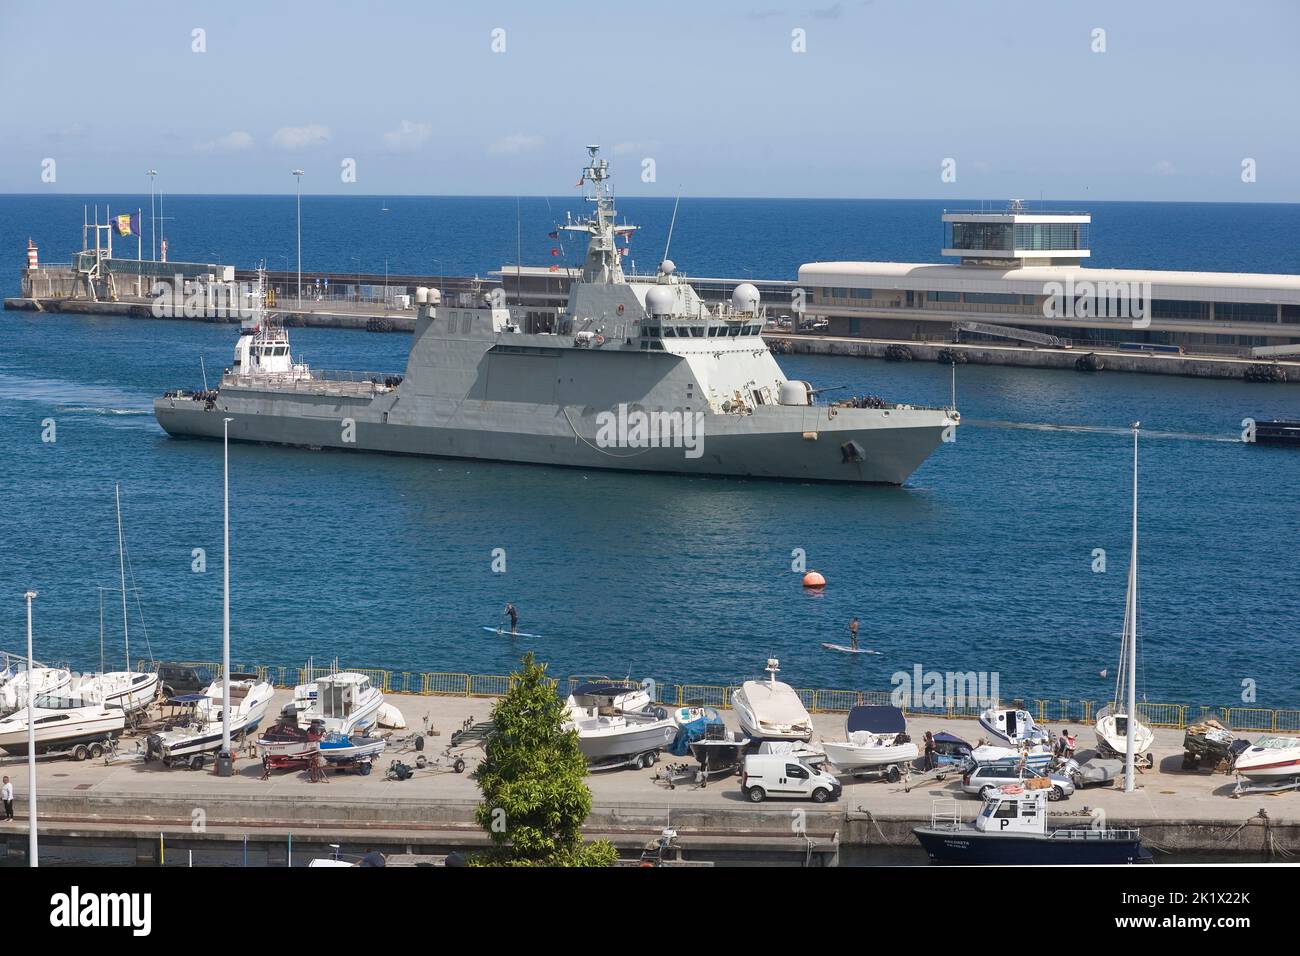 Spanish patrol vessel Relampago P43 arriving at the port of Funchal Madeira Stock Photo